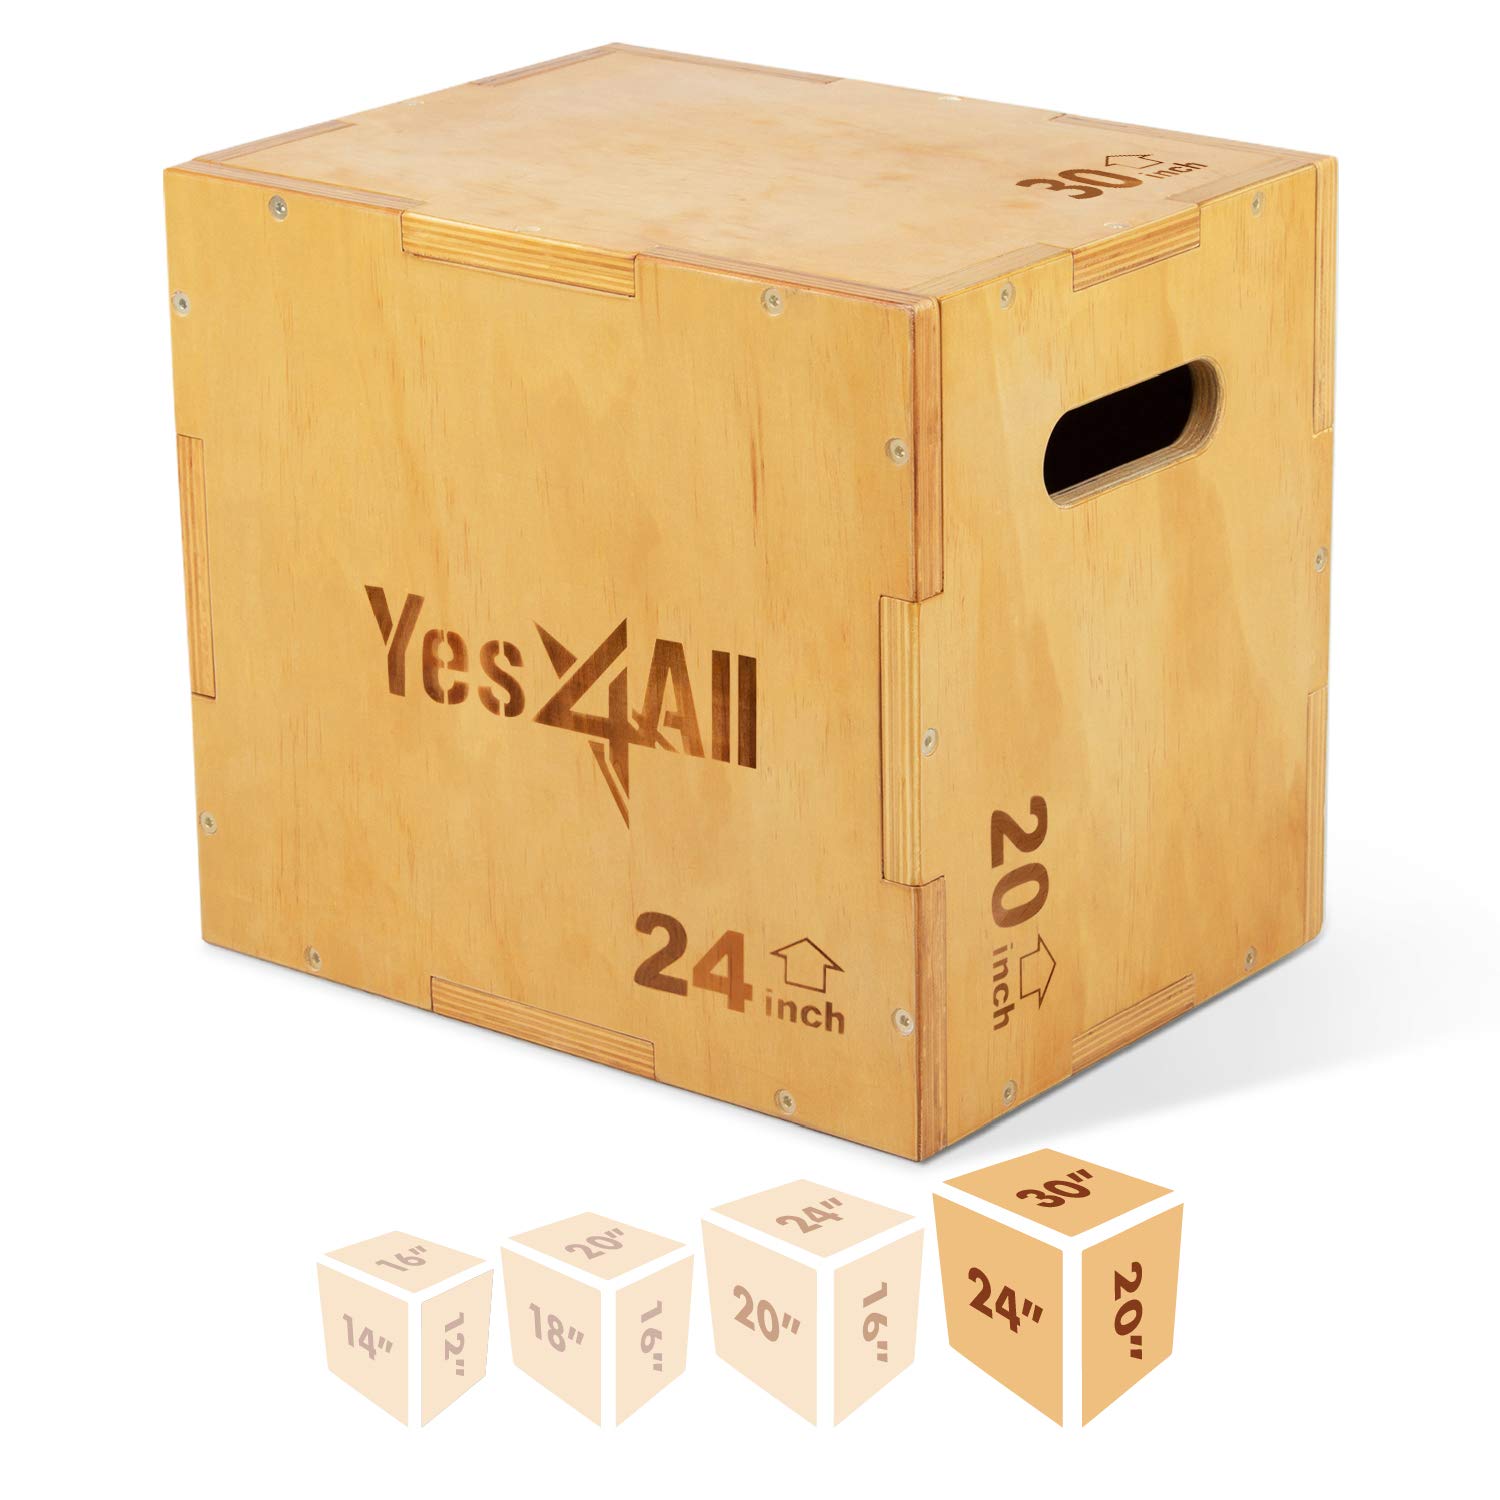 Yes4All Wooden Plyo Box - 30X24X20